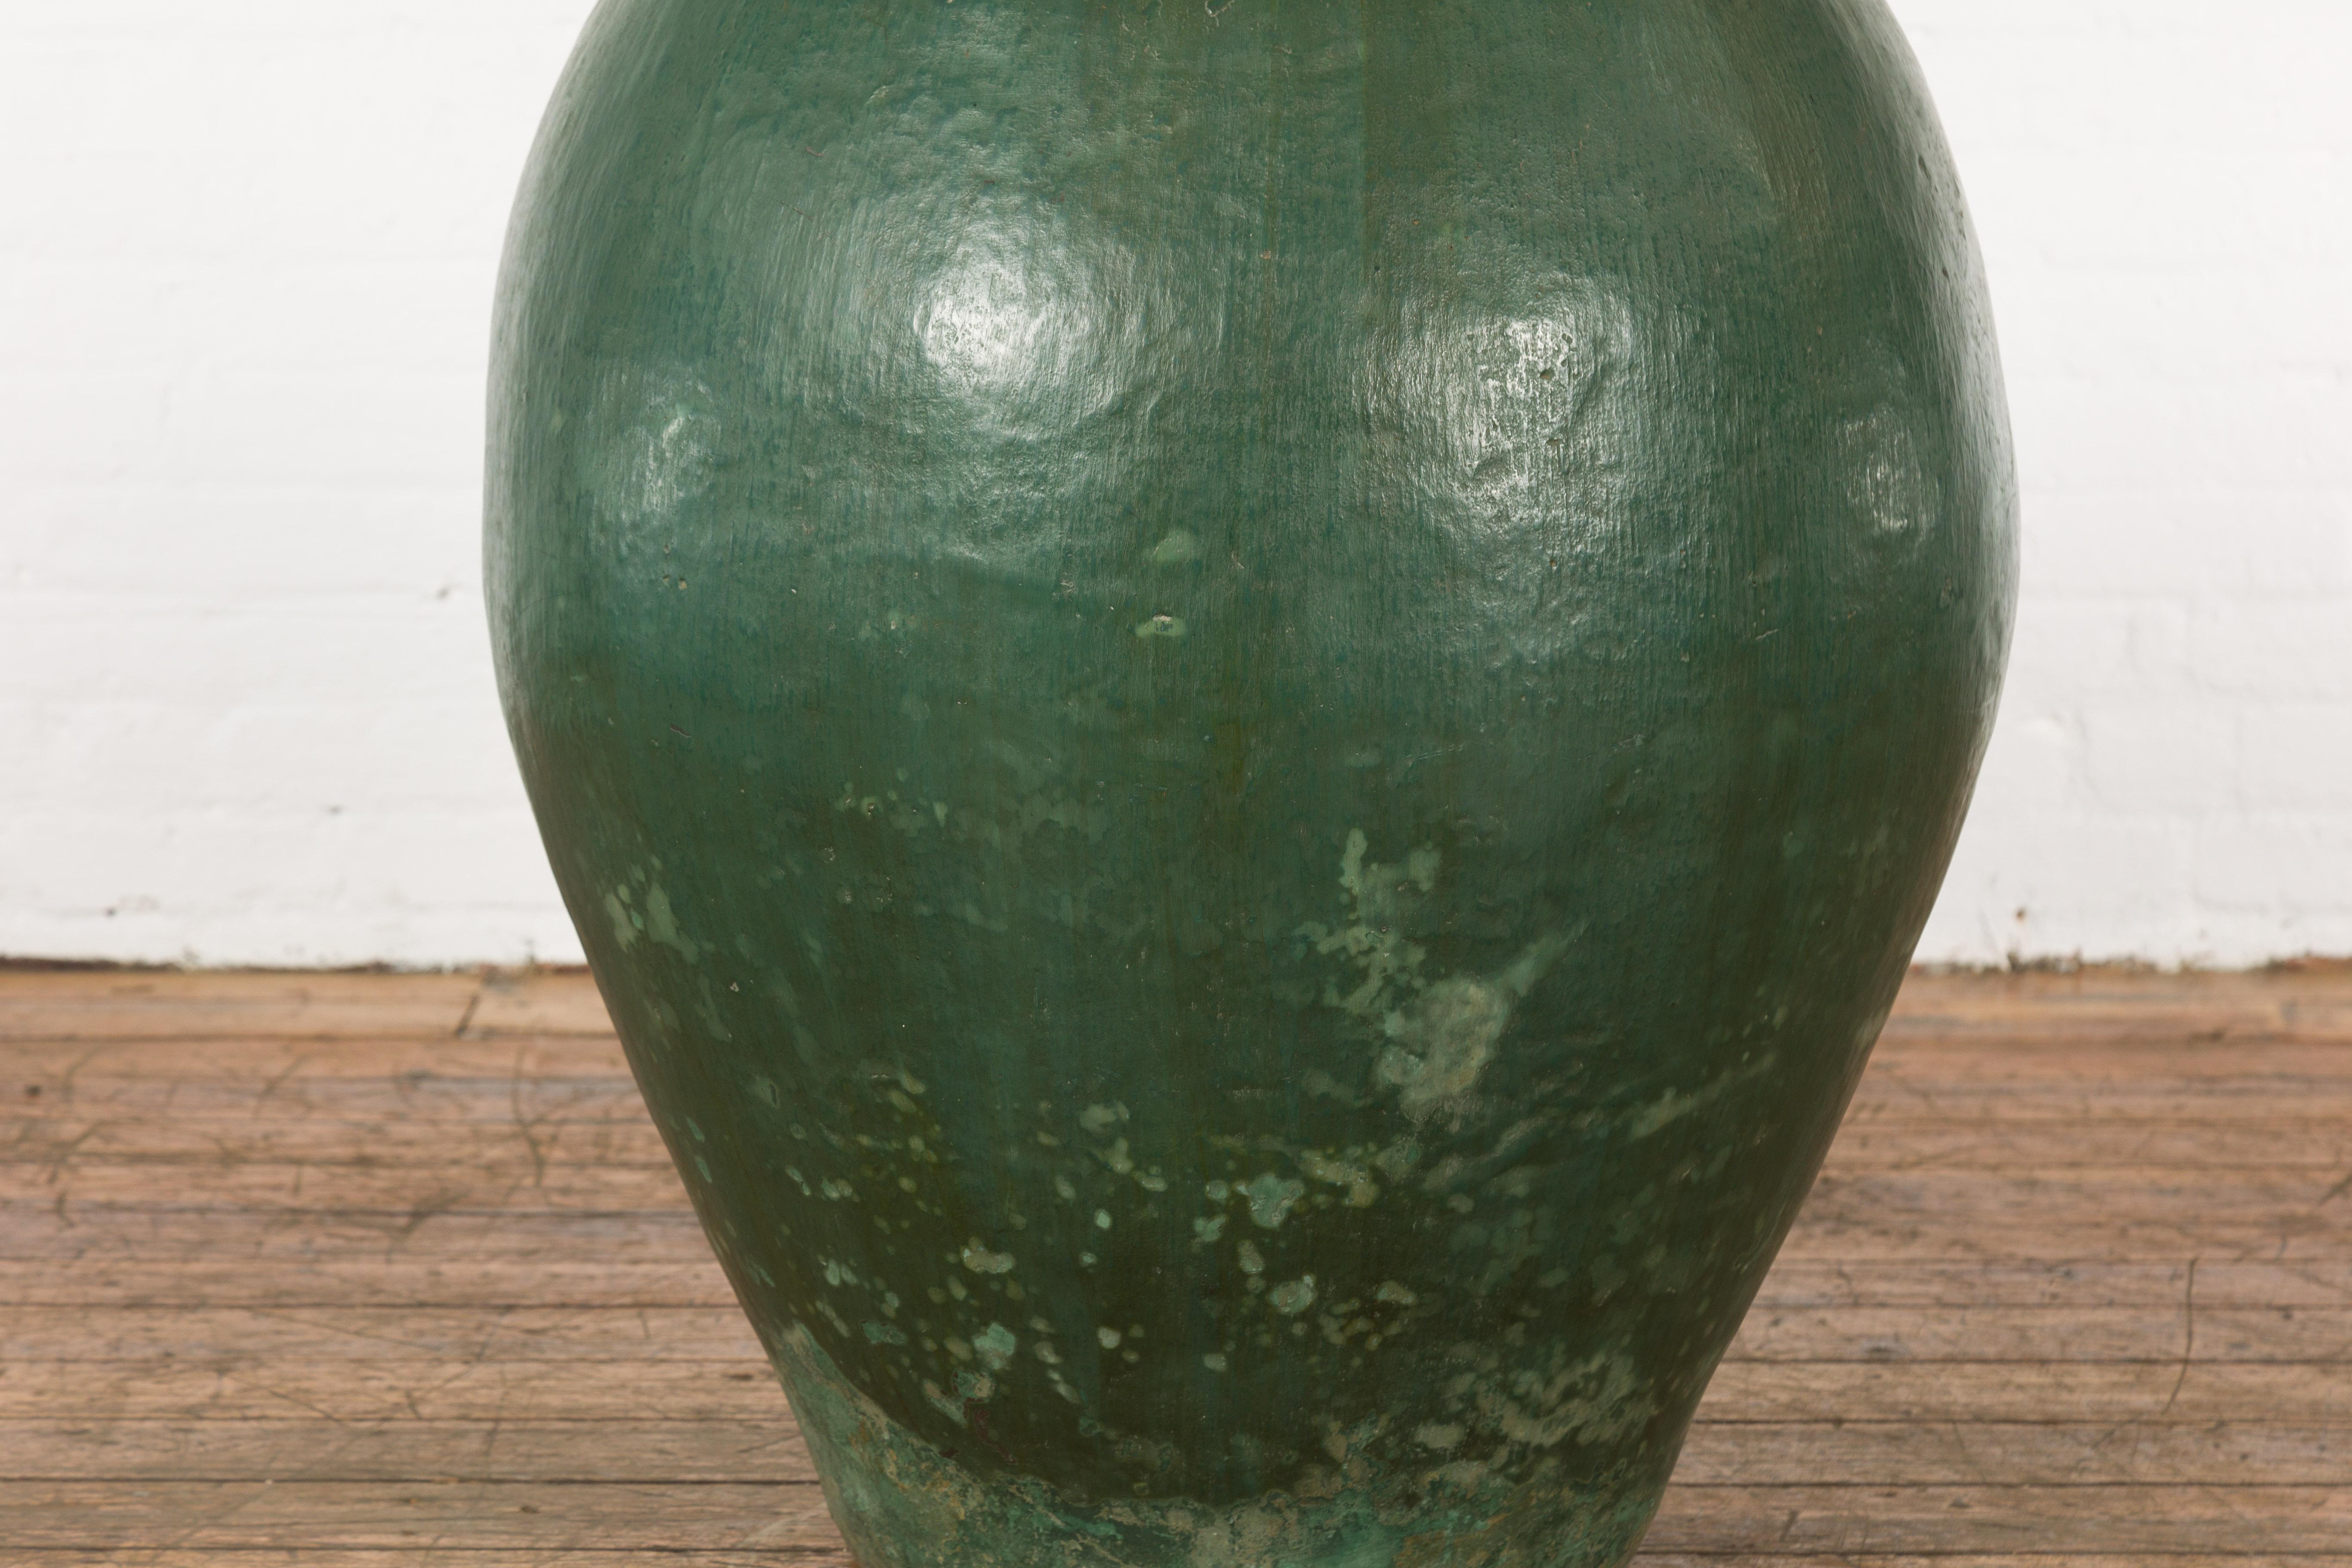 Large Thai 1950s Green Glazed Ceramic Planter with Brown Lip and Tapering Body For Sale 2